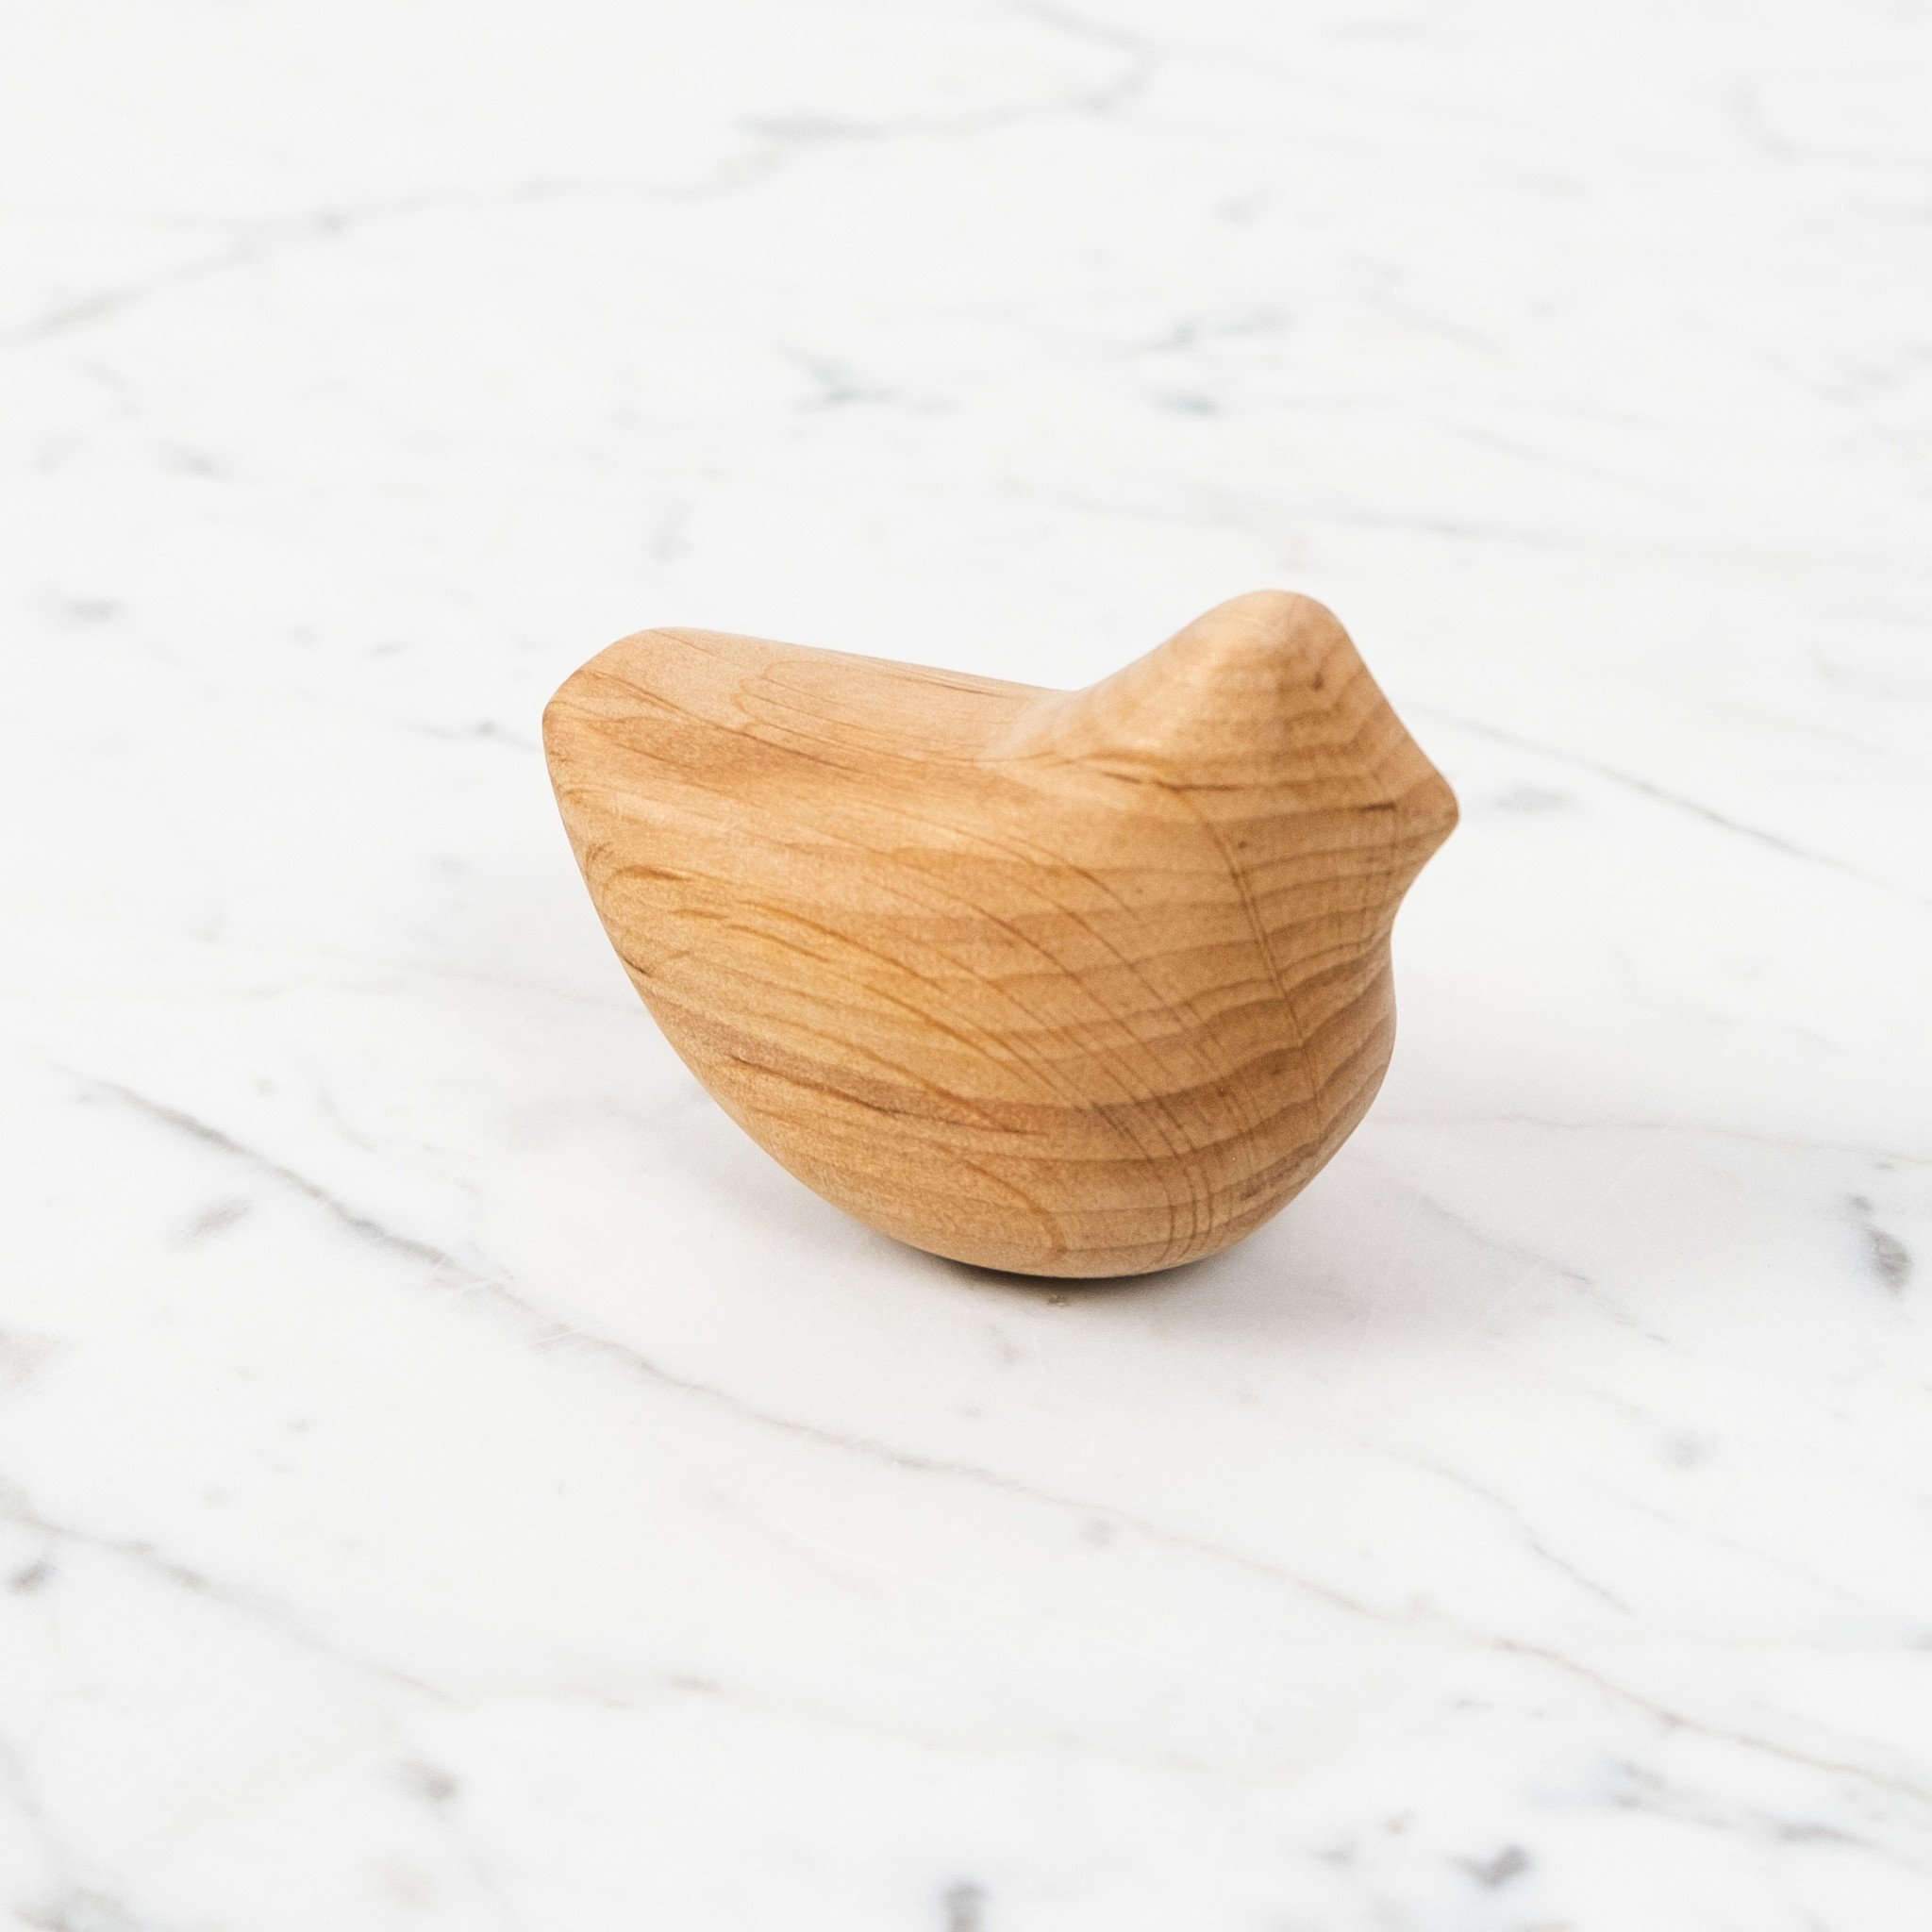 Grimm's Toys Wooden Relaxing Bird Soother